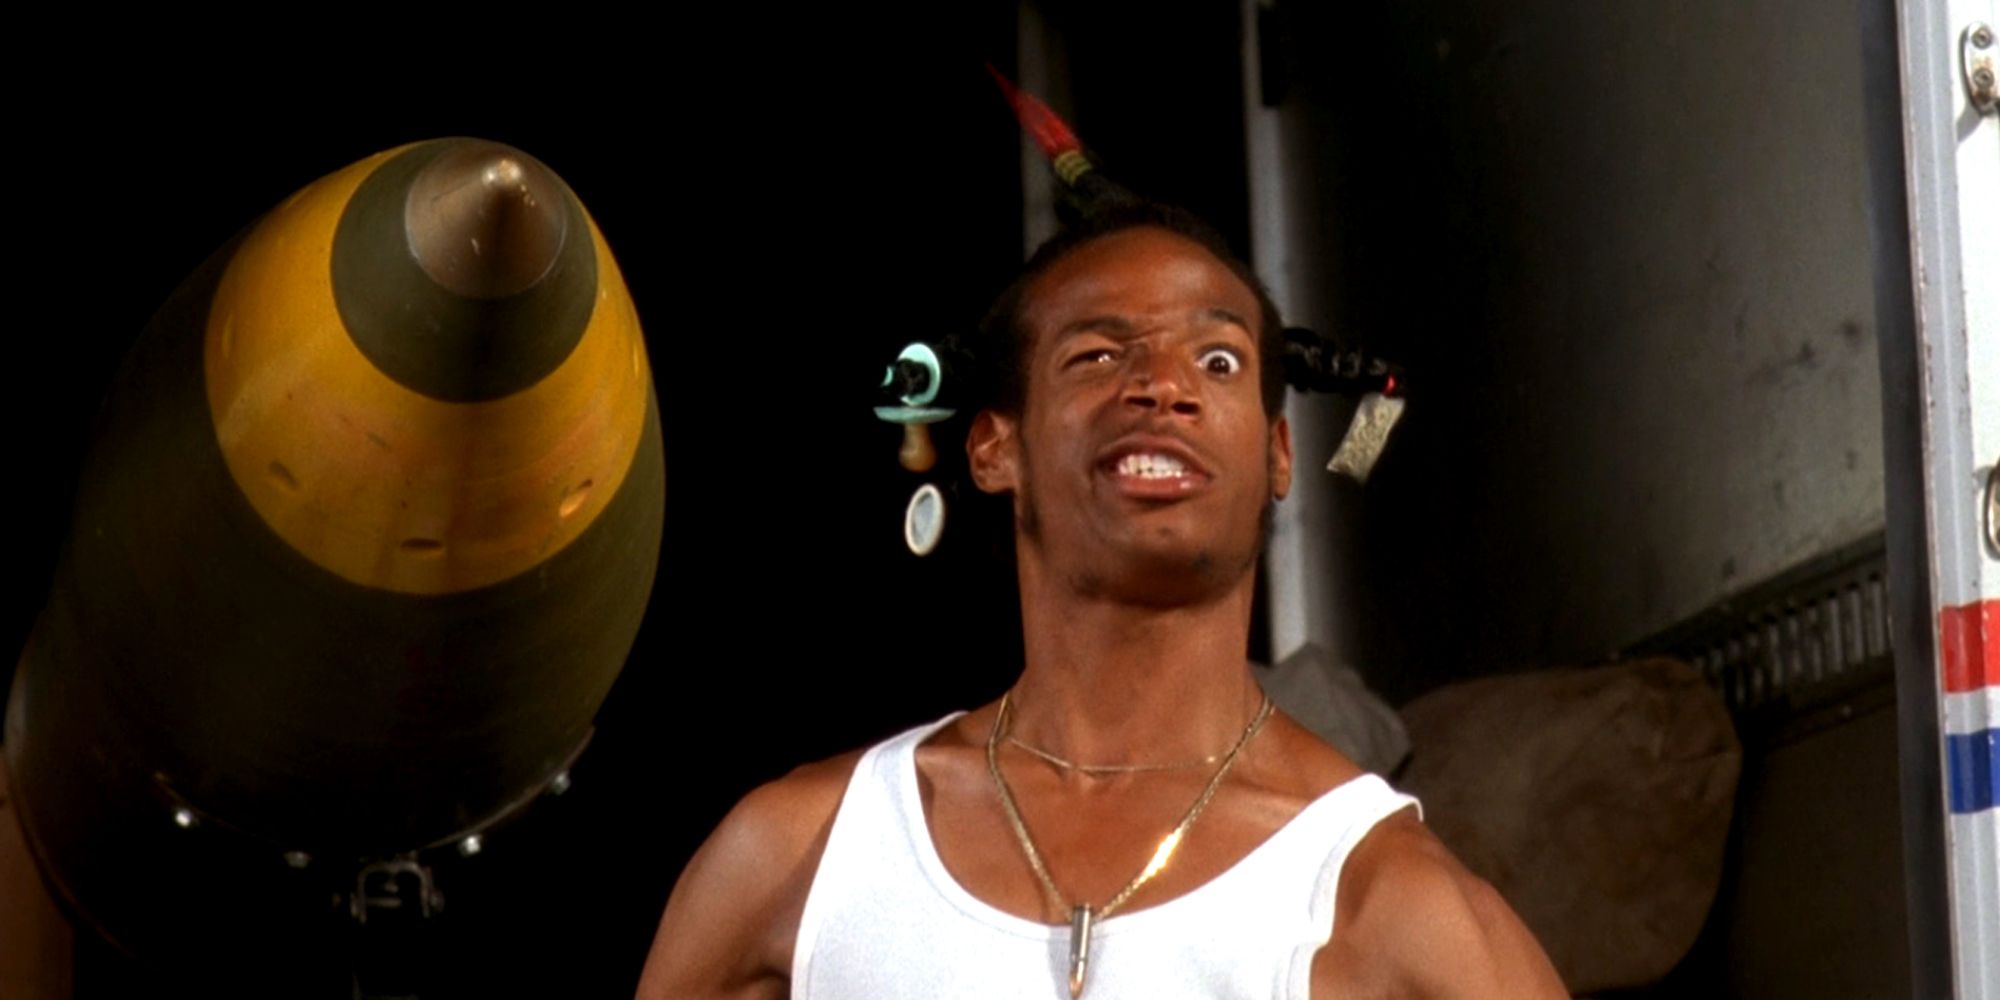 Marlon Wayans in a white tank top making a funny face in Don't Be A Menace